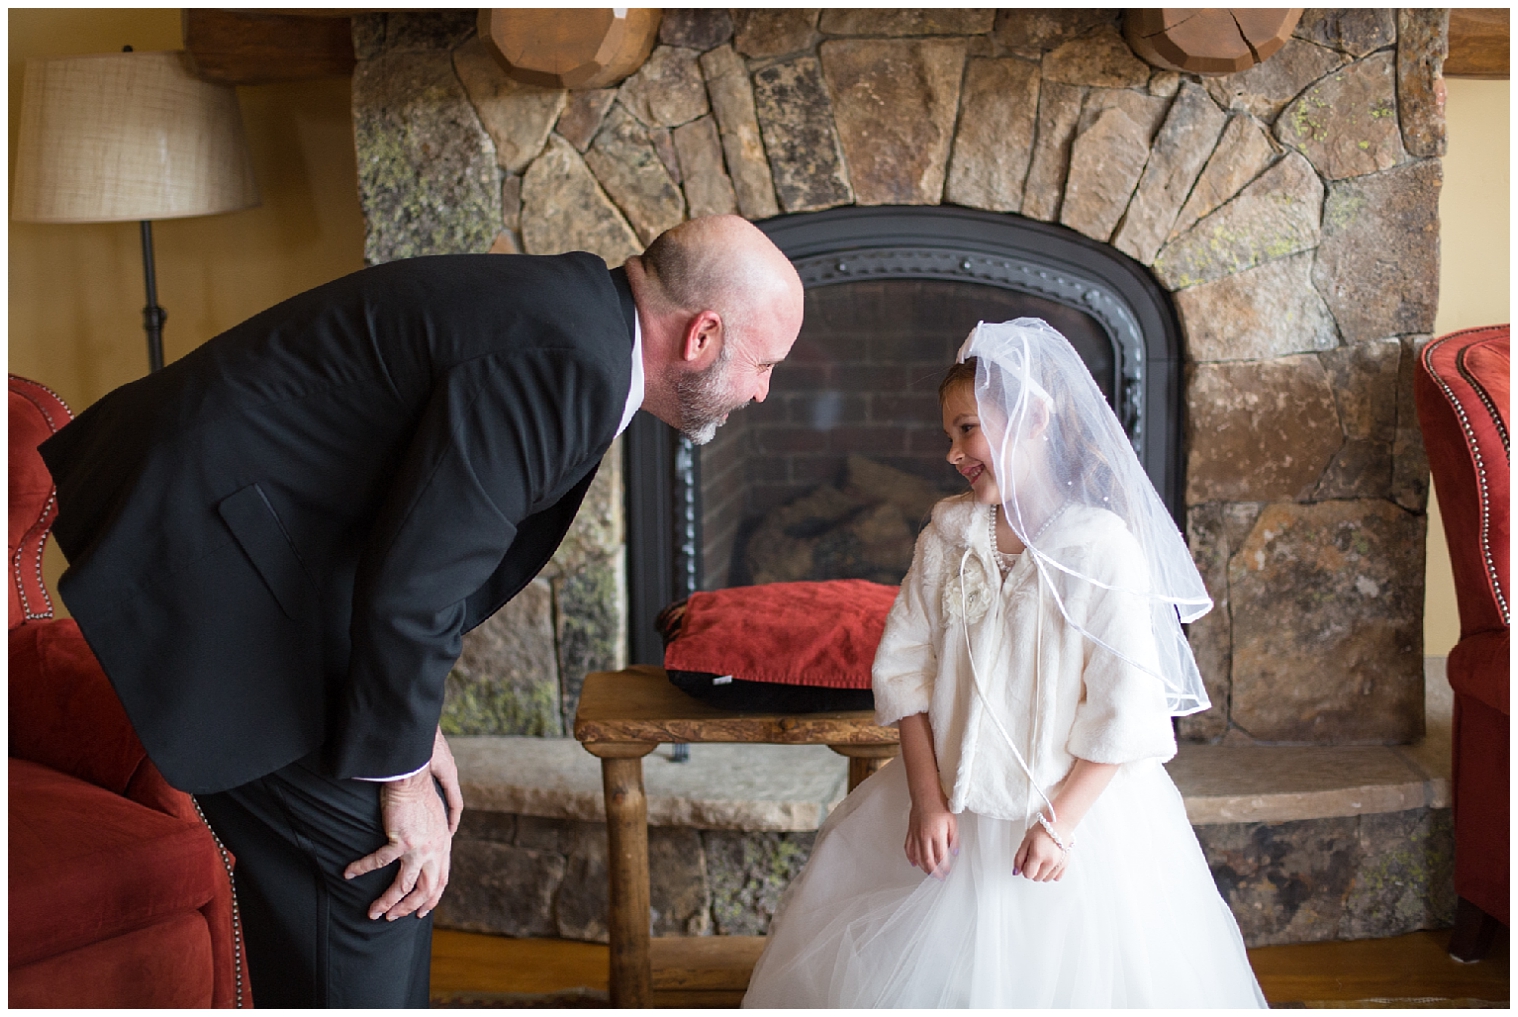 The flower girl smiles at a guest at a Breckenridge wedding.